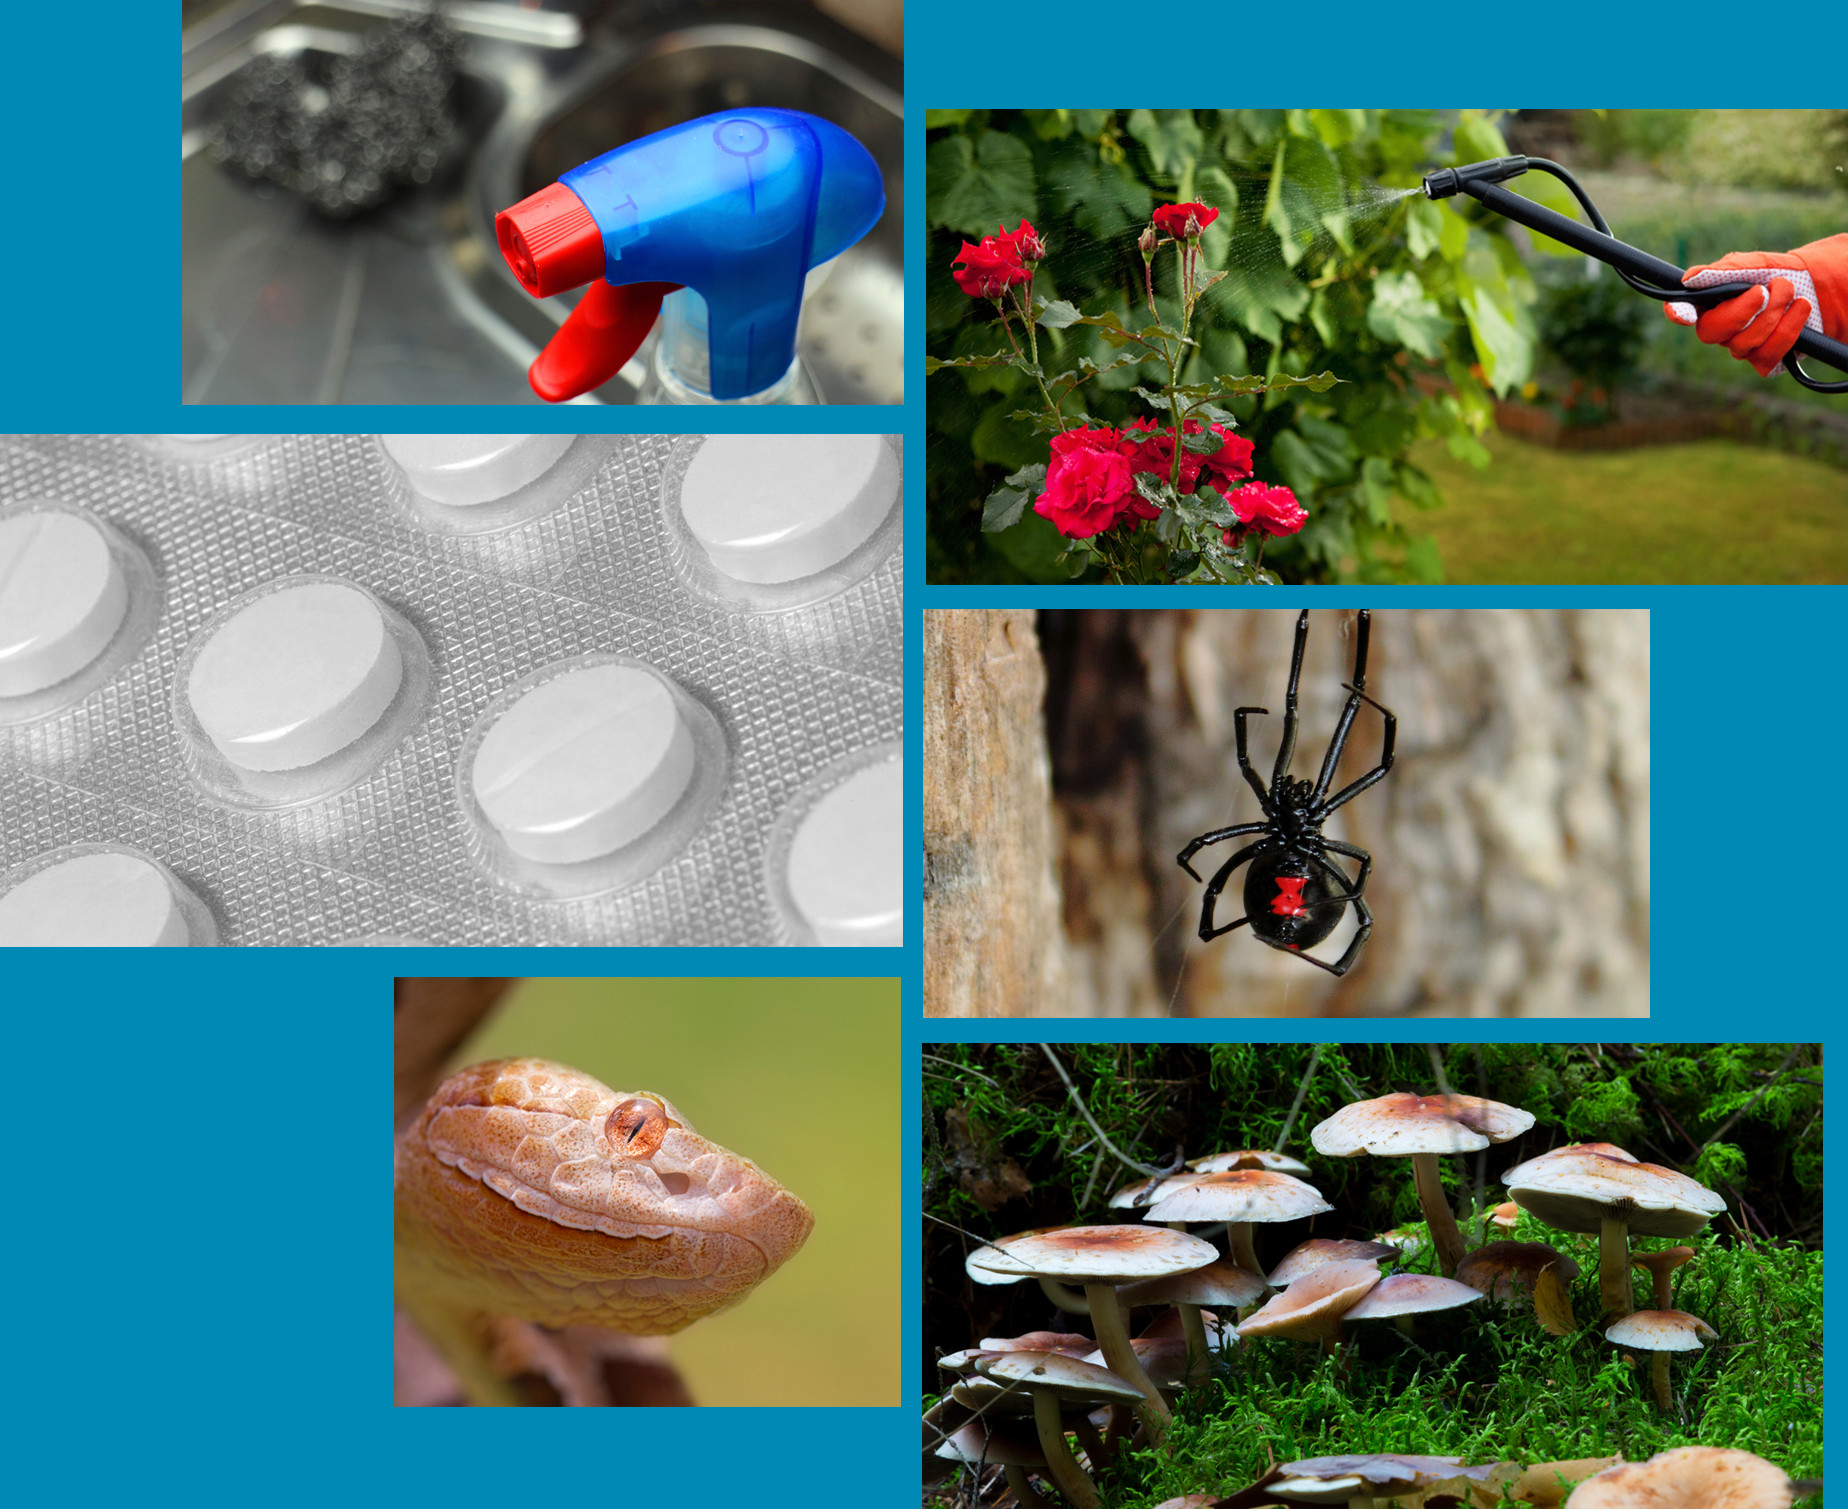 Collage of poisonous items